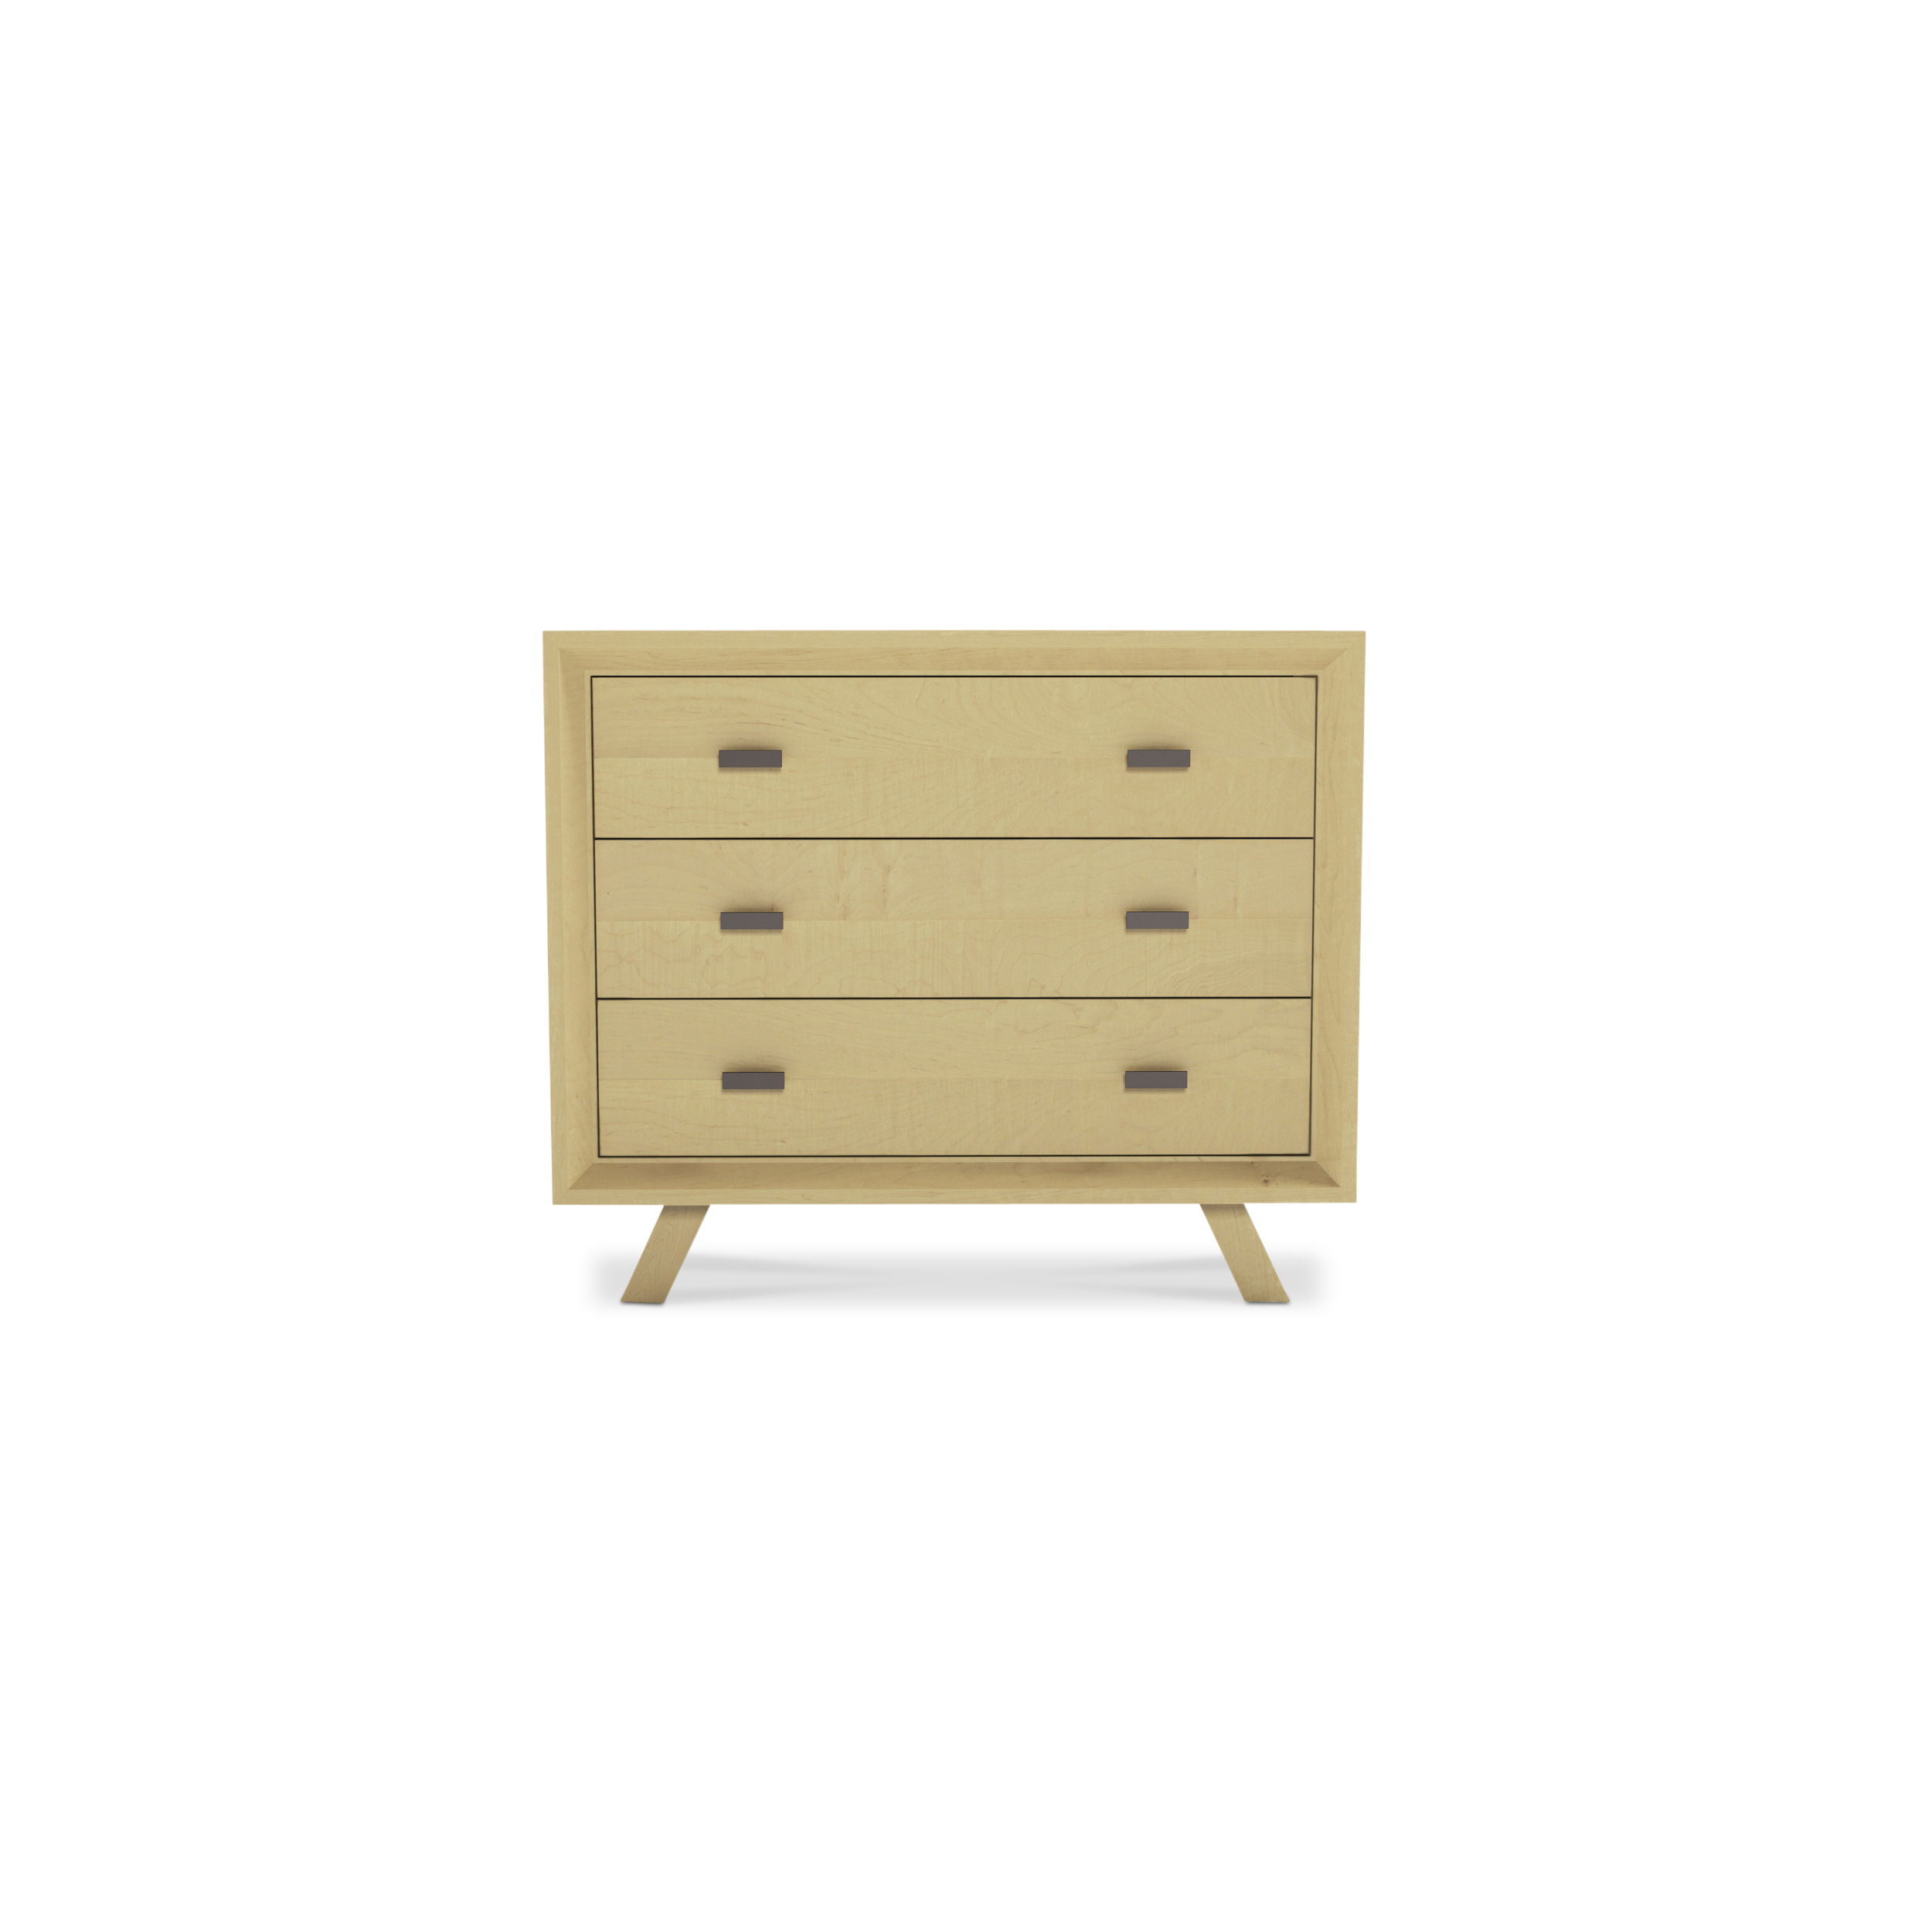 Series 555 Dresser With Three Drawers At 36″ In Width